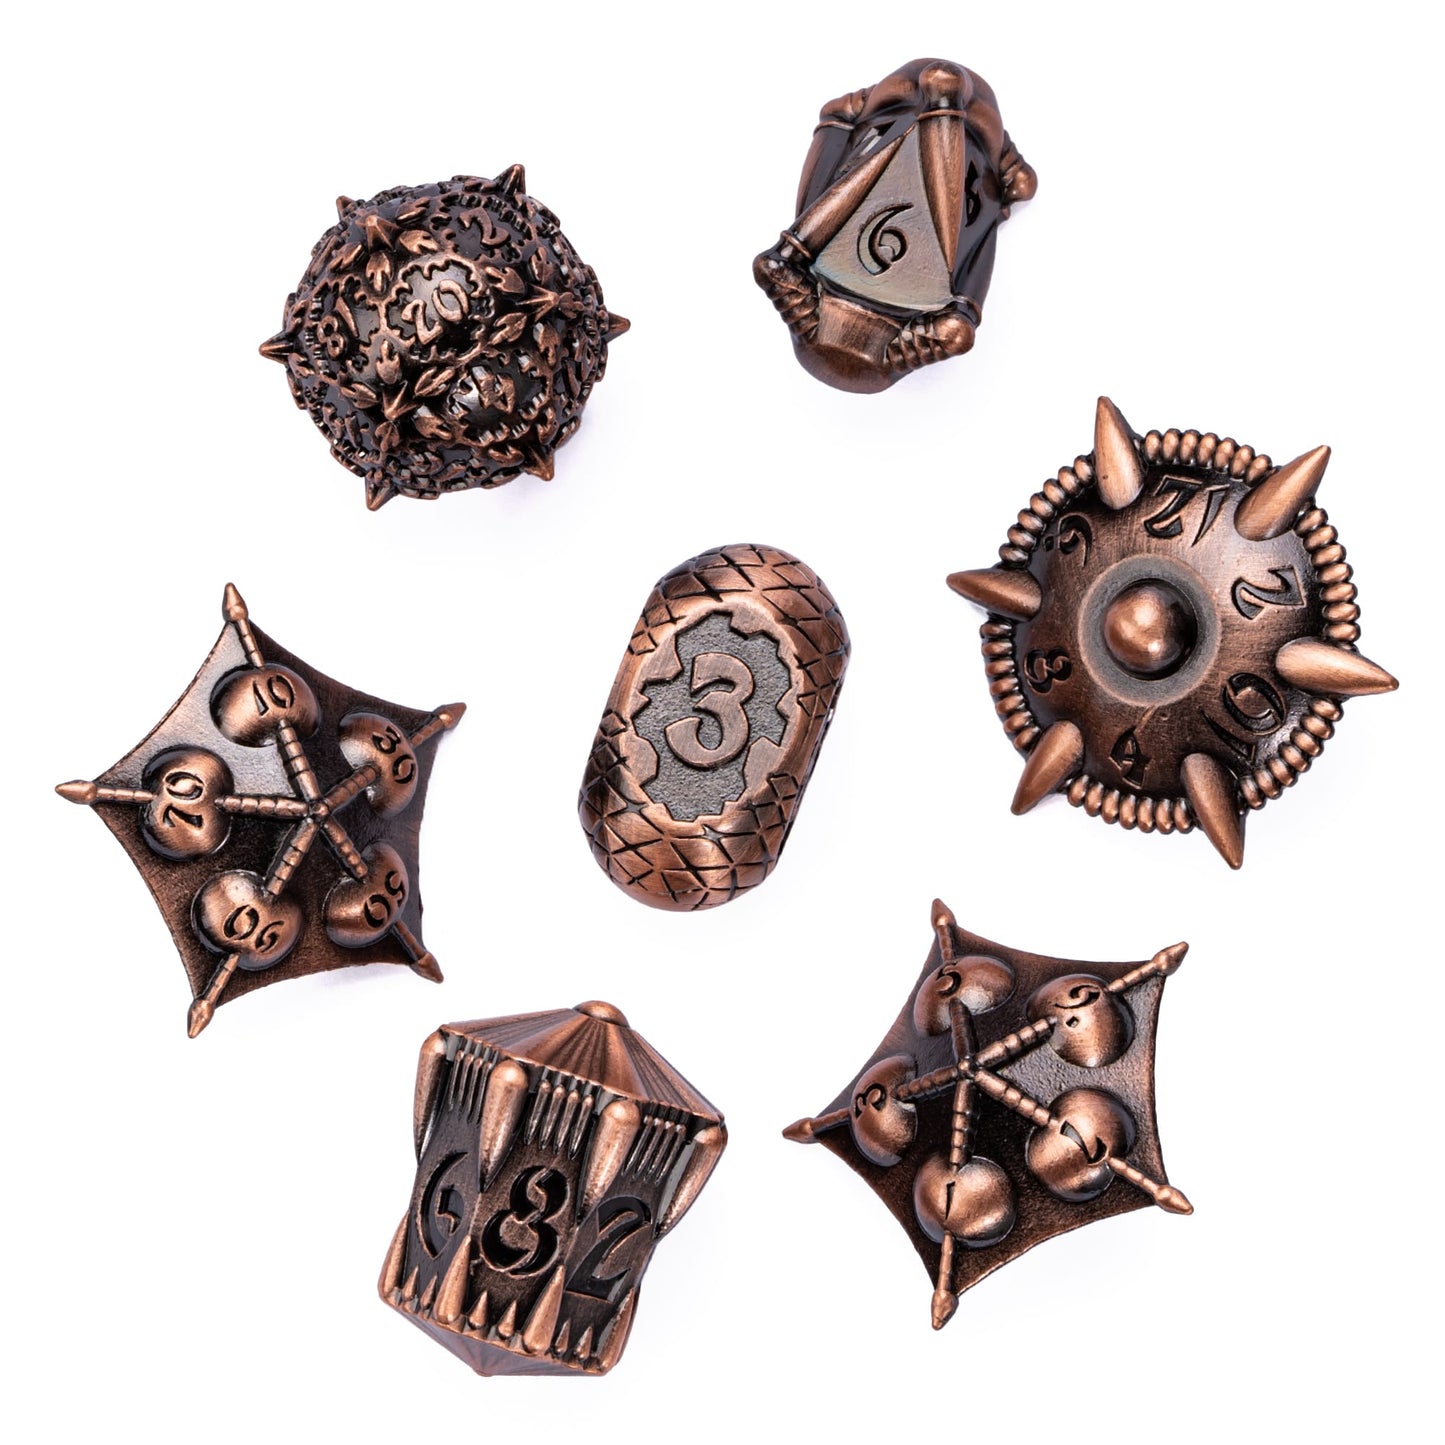 Eldritch Edge - Metal Dice Collection